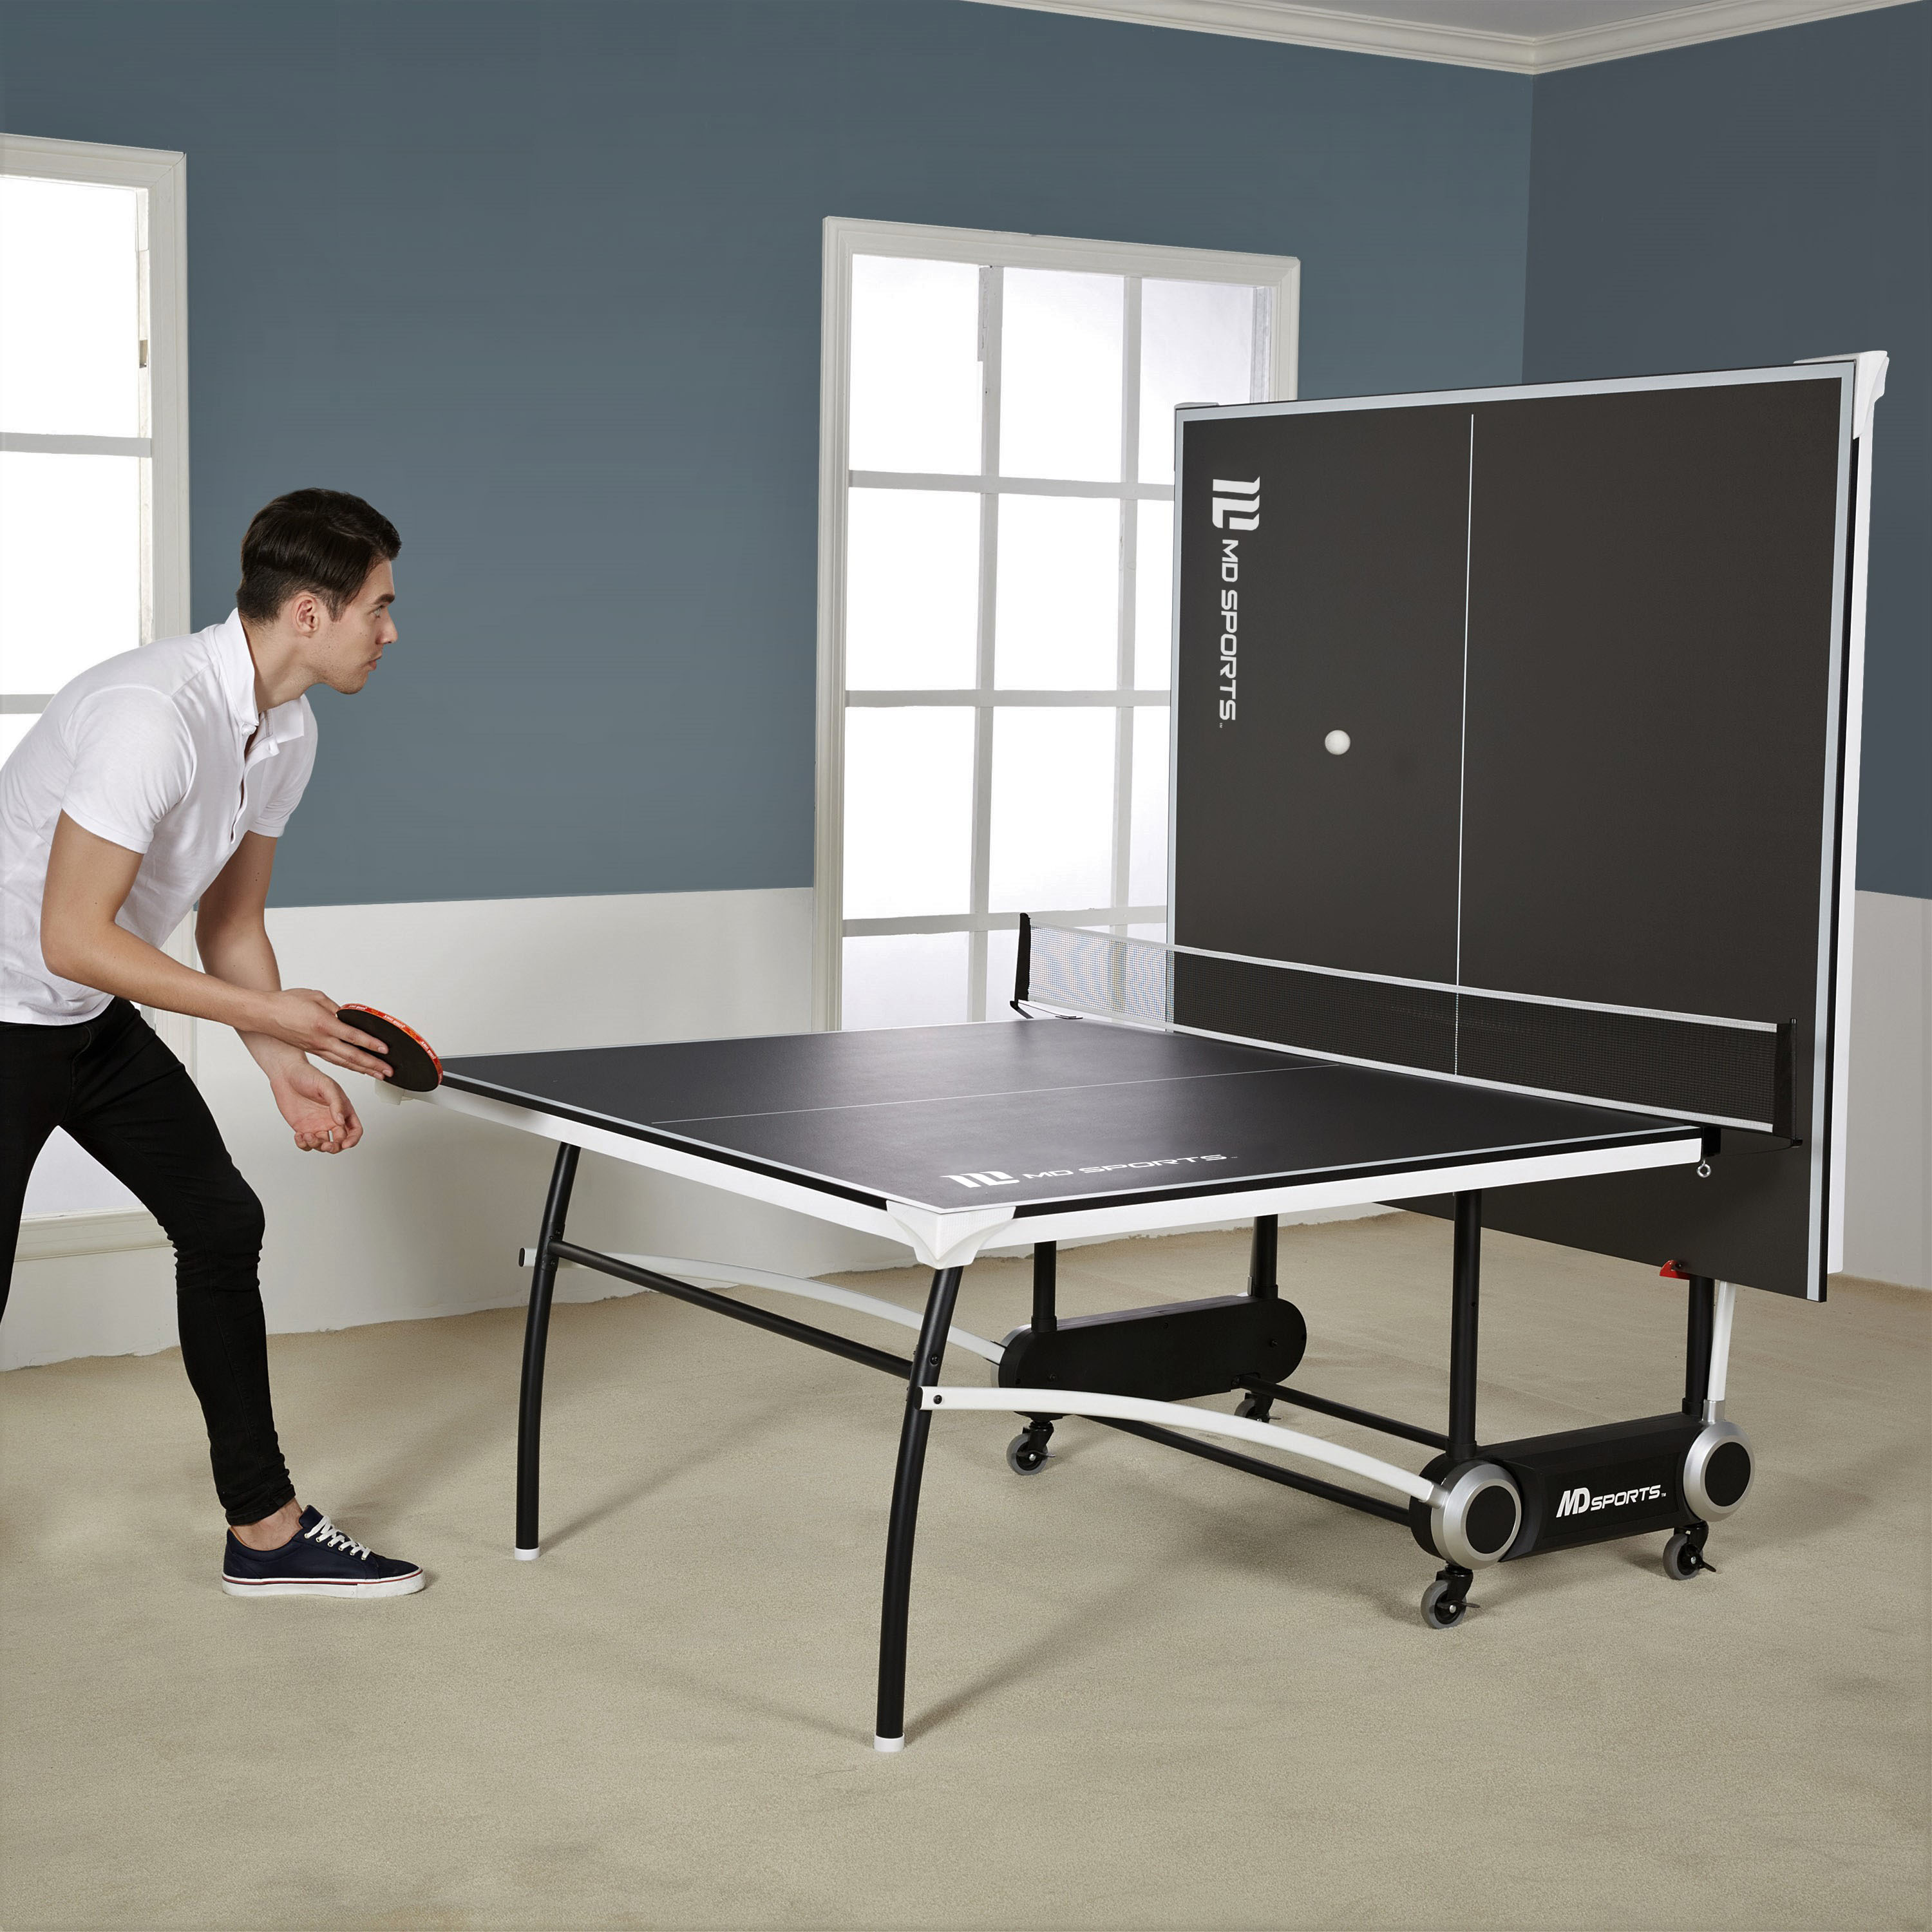 MD Sports Official Size 15mm 2-Piece Indoor Table Tennis - image 4 of 13